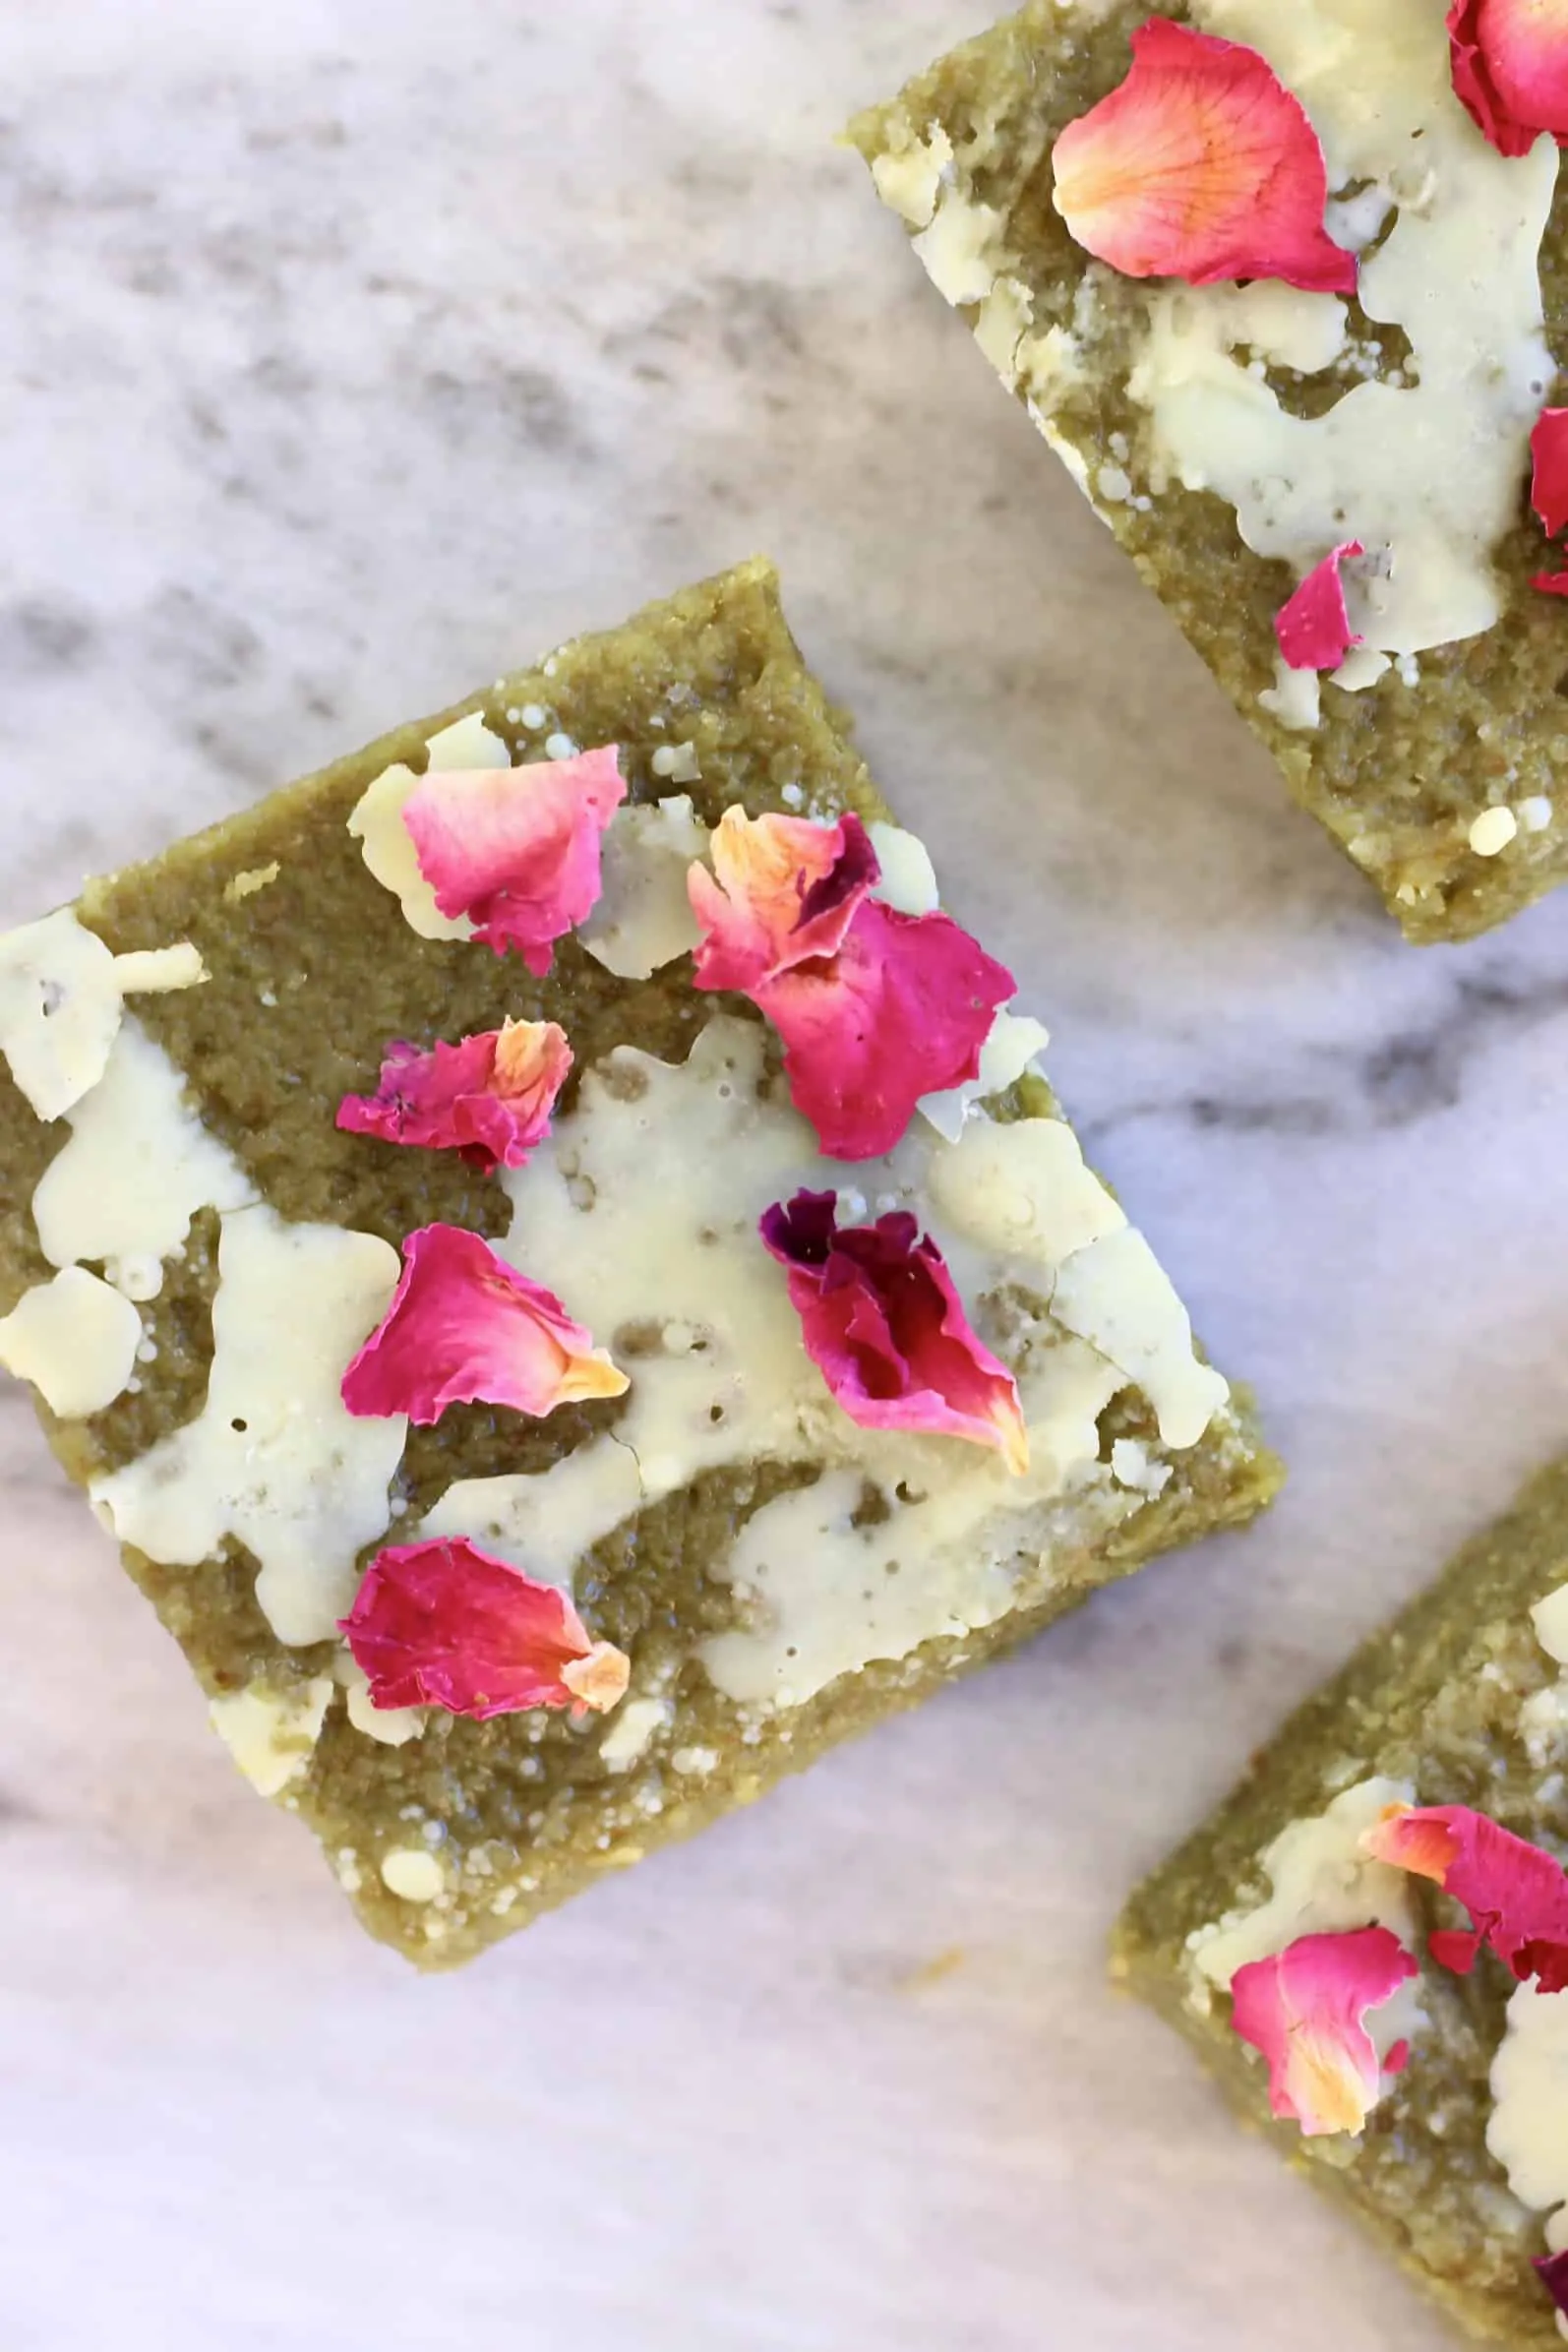 Three gluten-free vegan matcha brownies drizzled with white chocolate and decorated with rose petals